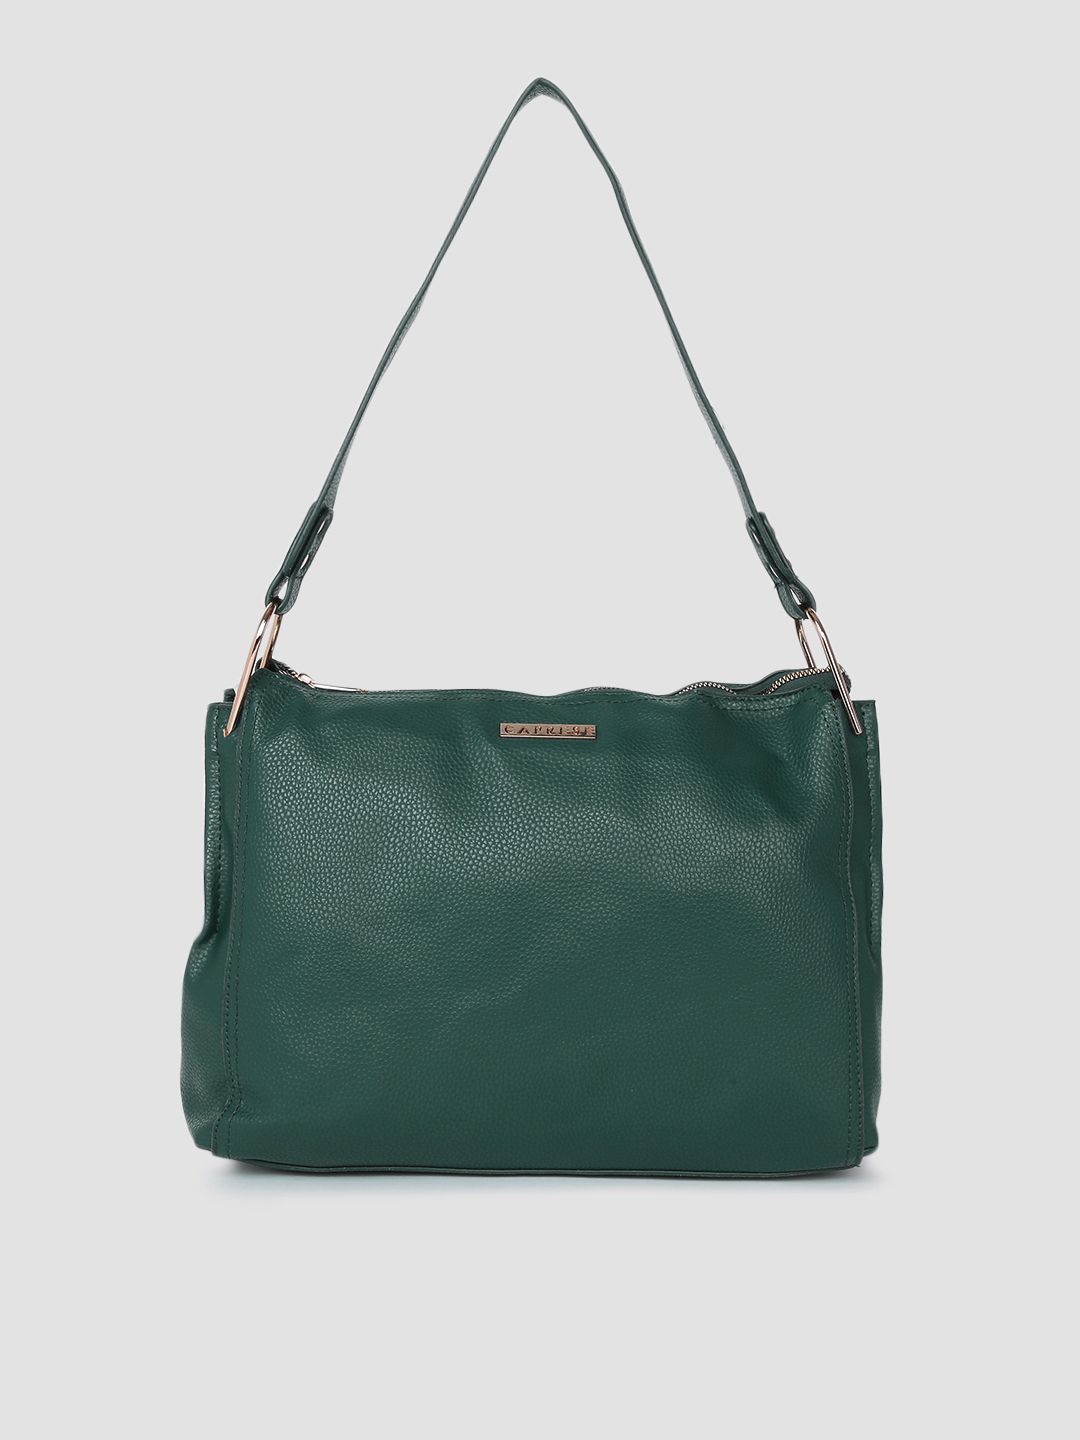 Caprese Forest Green Leather Hobo Bag Price in India